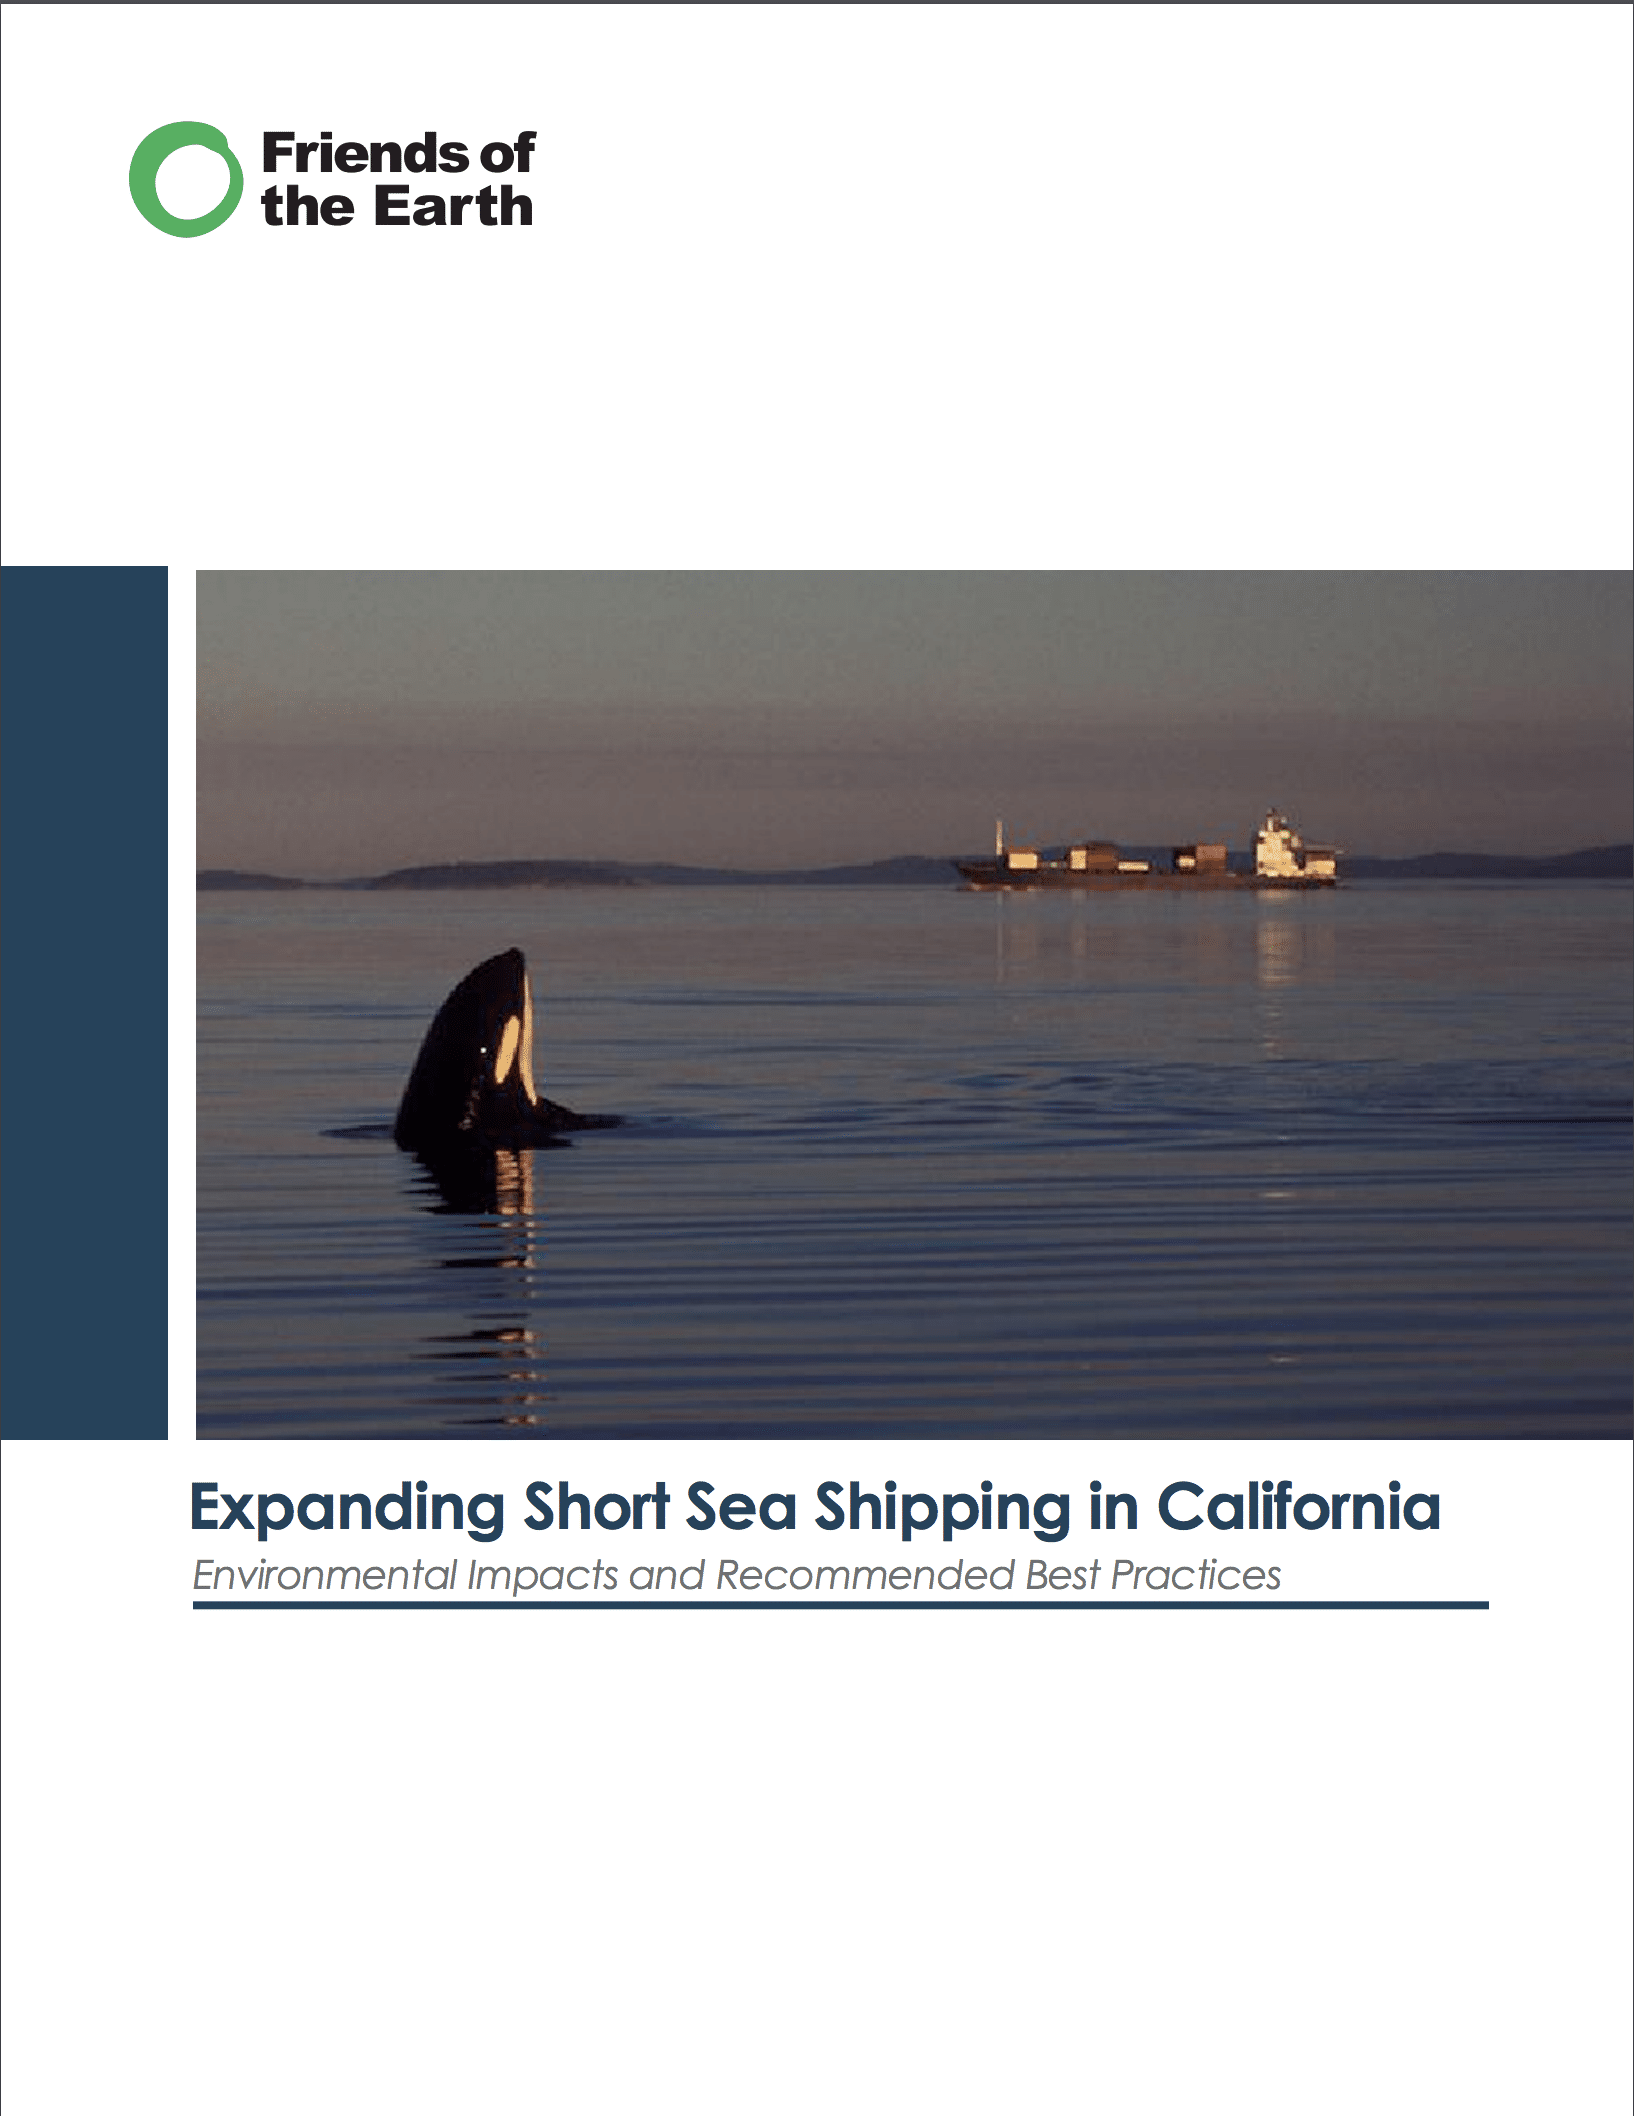 Expanding short sea shipping in California: Environmental impacts and recommended best practices